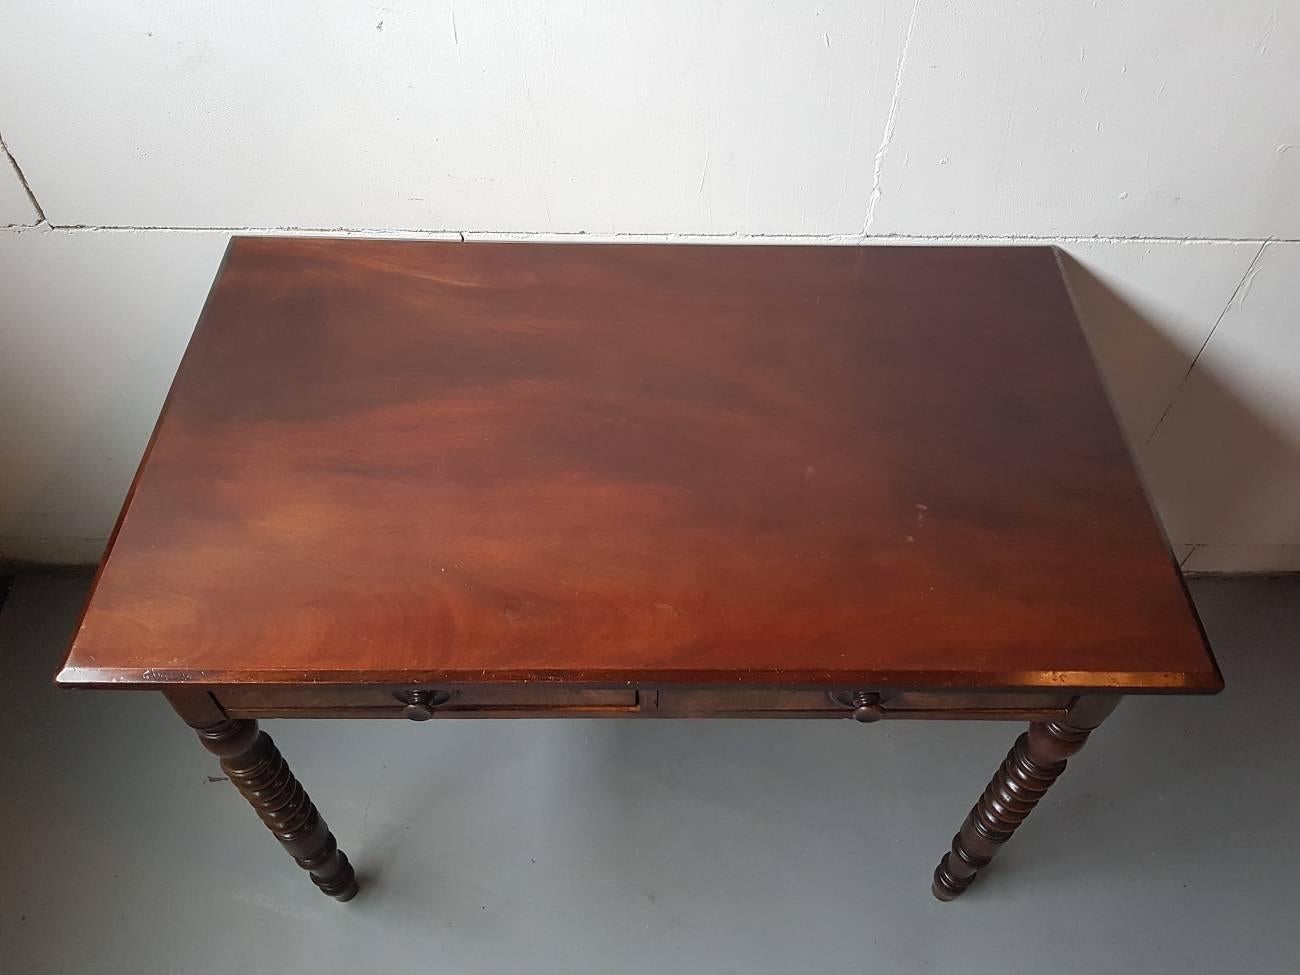 Dutch Antique partly solid and veneered mahogany table, circa 1880 with two drawers and standing on turned legs with various shapes.

The measurements are,
Depth 65 cm/ 25.5 inch.
Width 100 cm/ 39.3 inch.
Height 75 cm/ 29.5 inch.
    